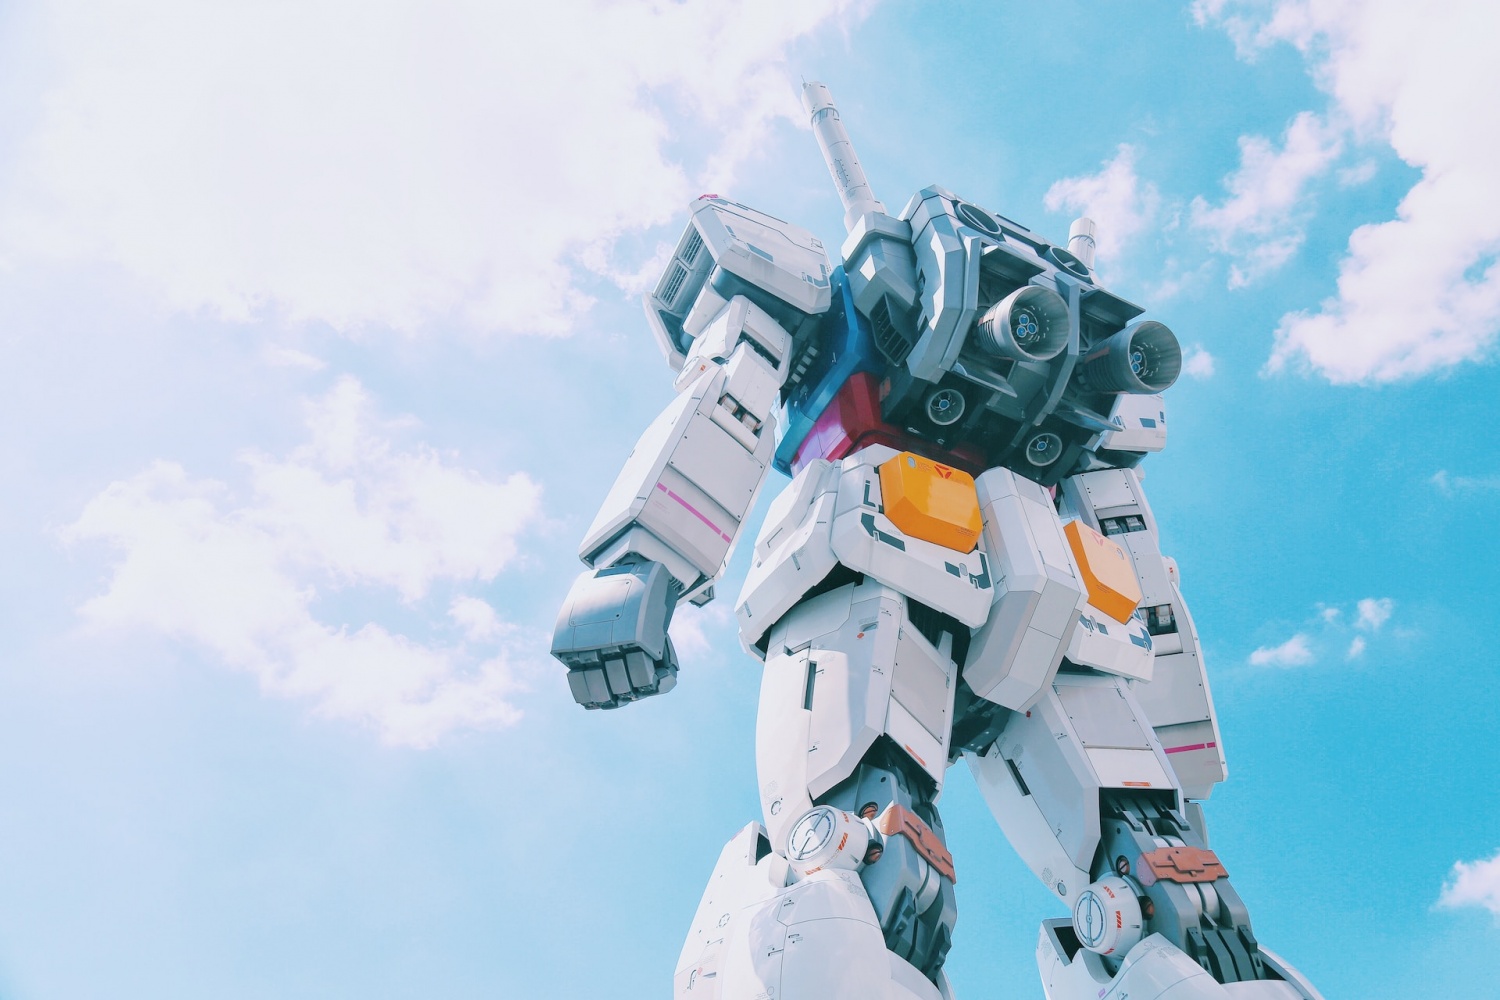 Real-Life Gundam? Japanese Engineers Create Robot For Space Exploration, Disaster Relief